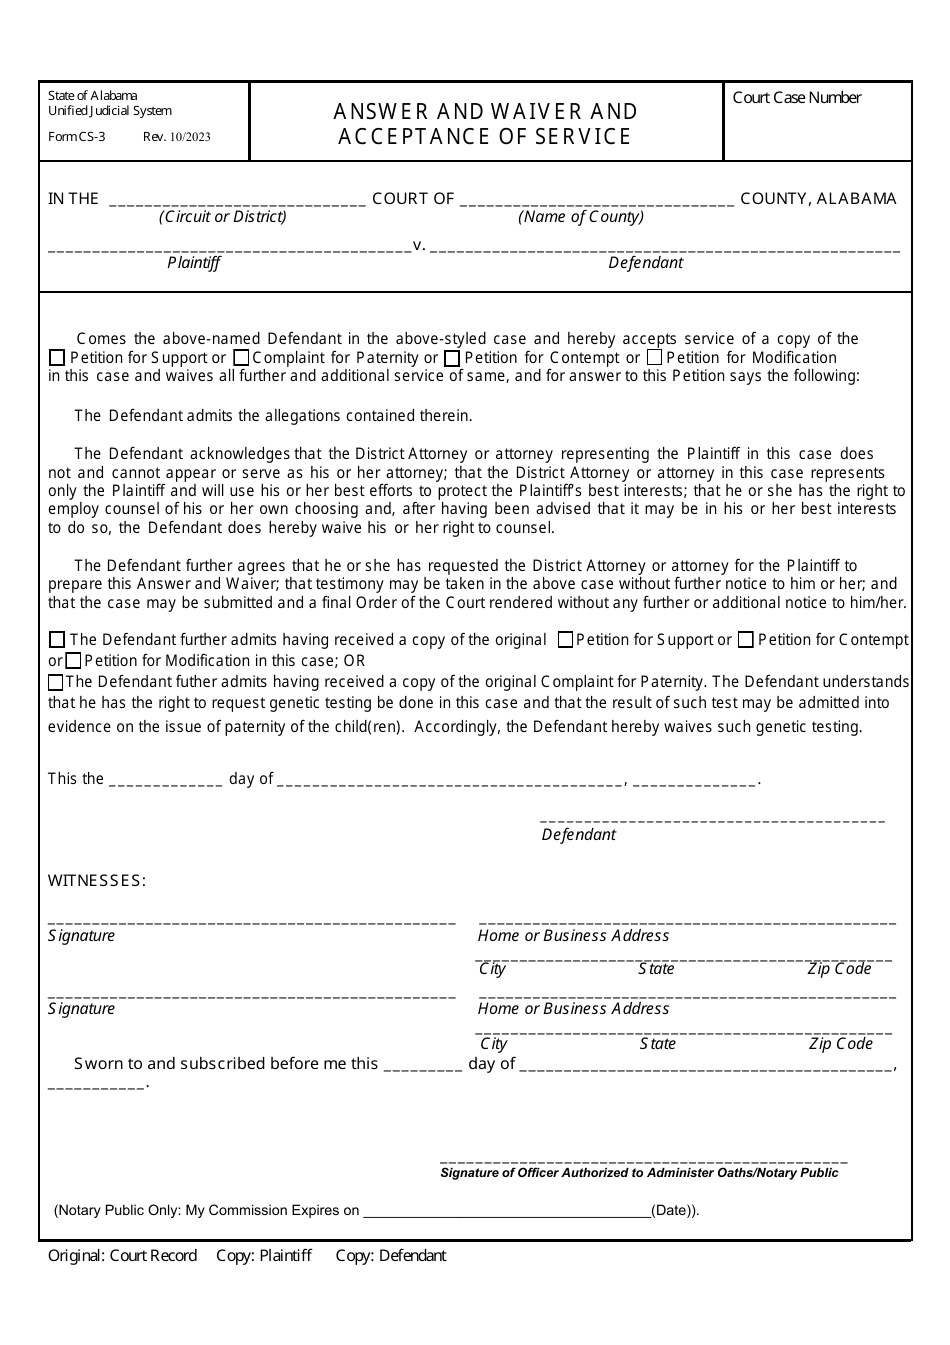 Form CS-3 Answer and Waiver and Acceptance of Service - Alabama, Page 1